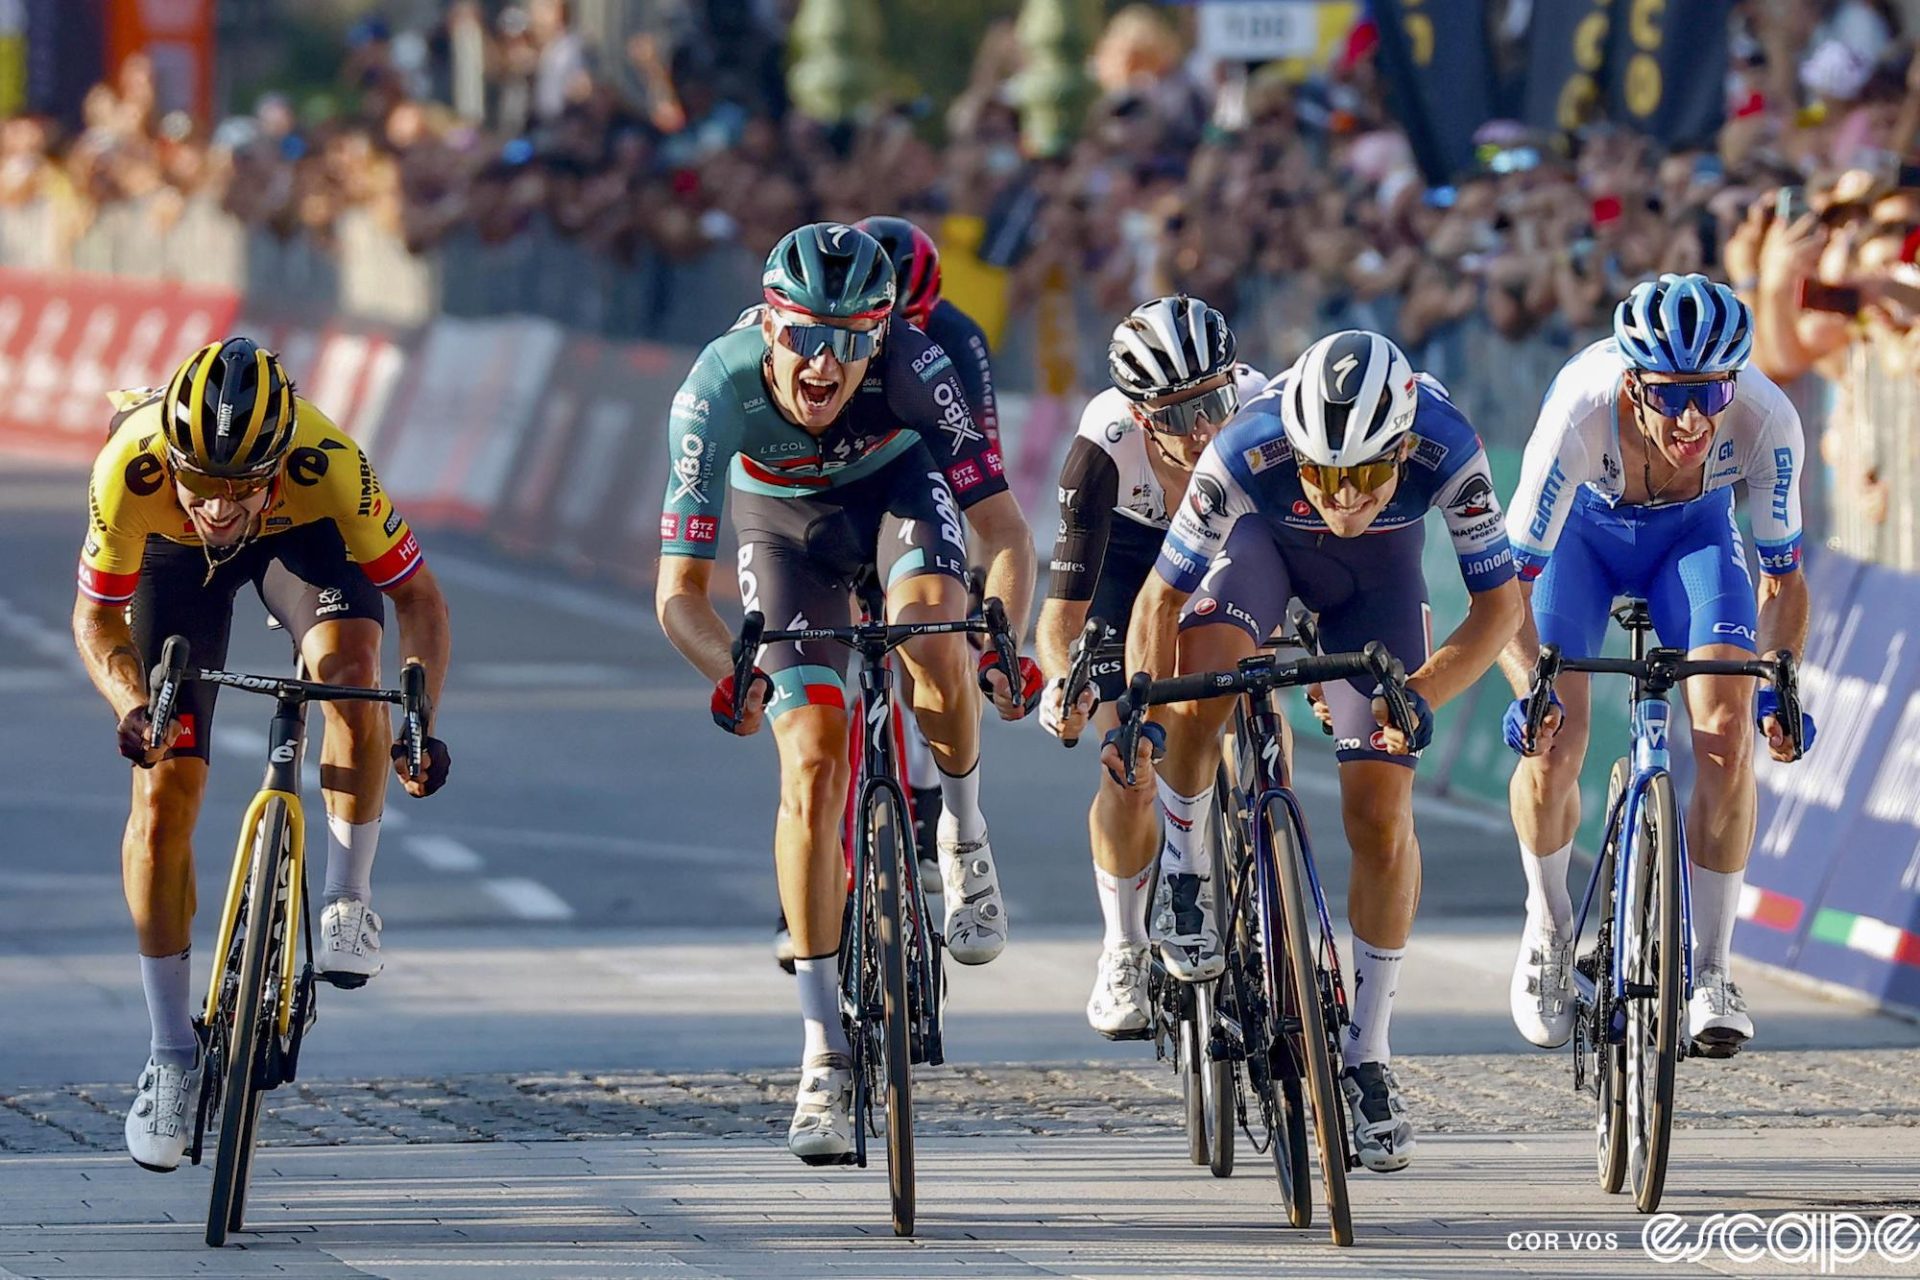 From left to right, Primož Roglič, Aleksandr Vlasov, Adam Yates, Andrea Bagioli, and Simon Yates sprint at Il Lombardia. Obscured behind Vlasov is Carlos Rodriguez. Not shown is winner Tadej Pogačar. Vlasov's mouth is open wide.